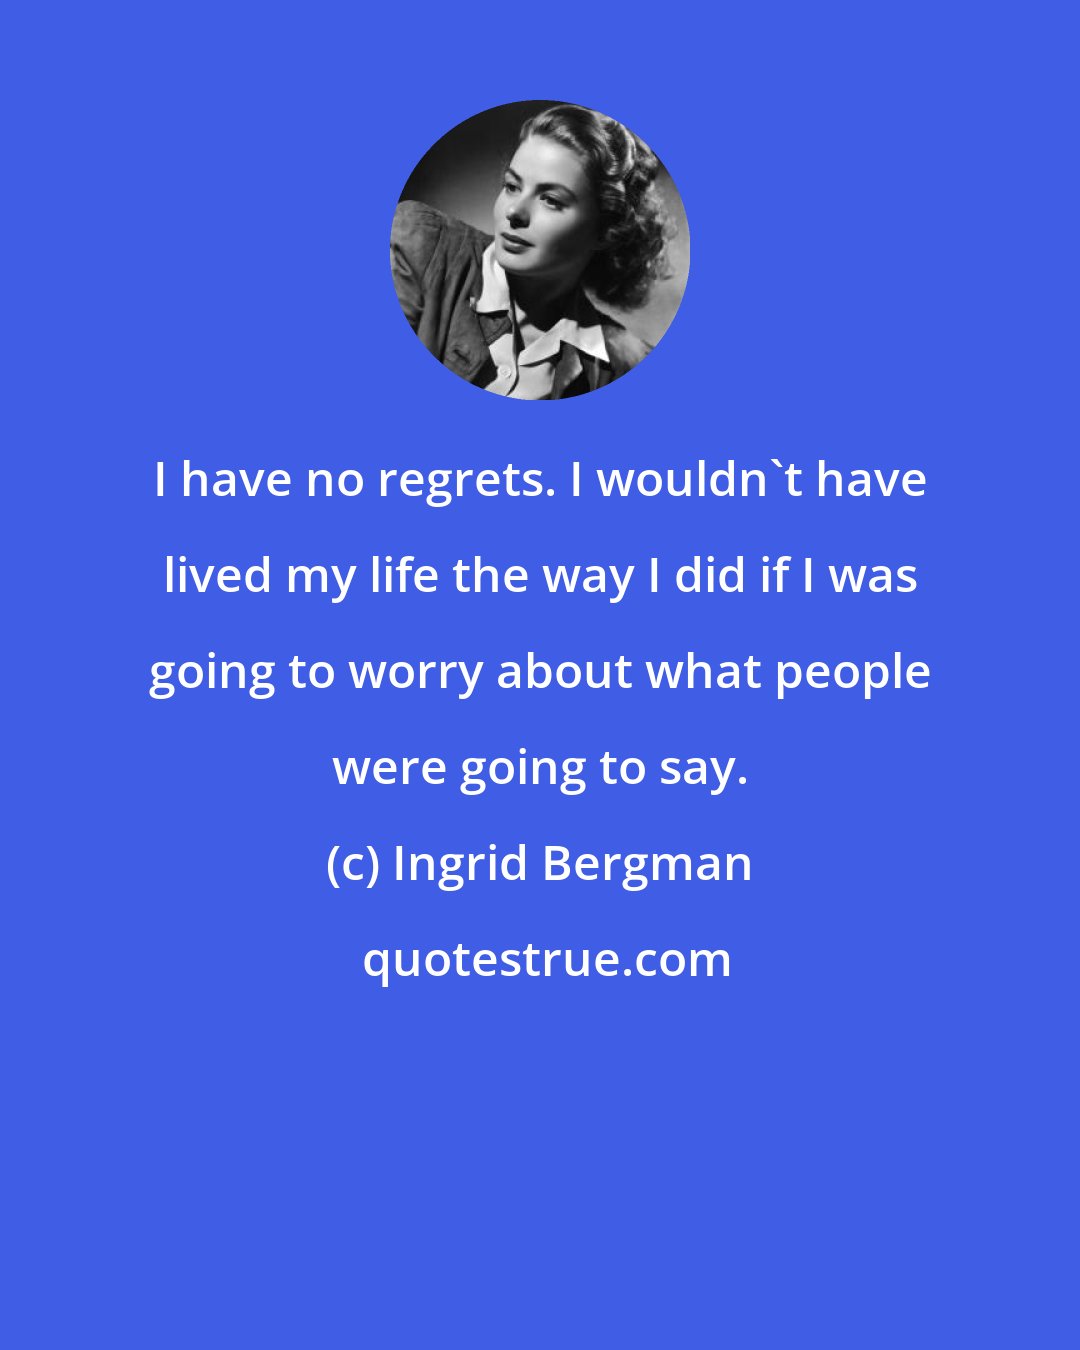 Ingrid Bergman: I have no regrets. I wouldn't have lived my life the way I did if I was going to worry about what people were going to say.